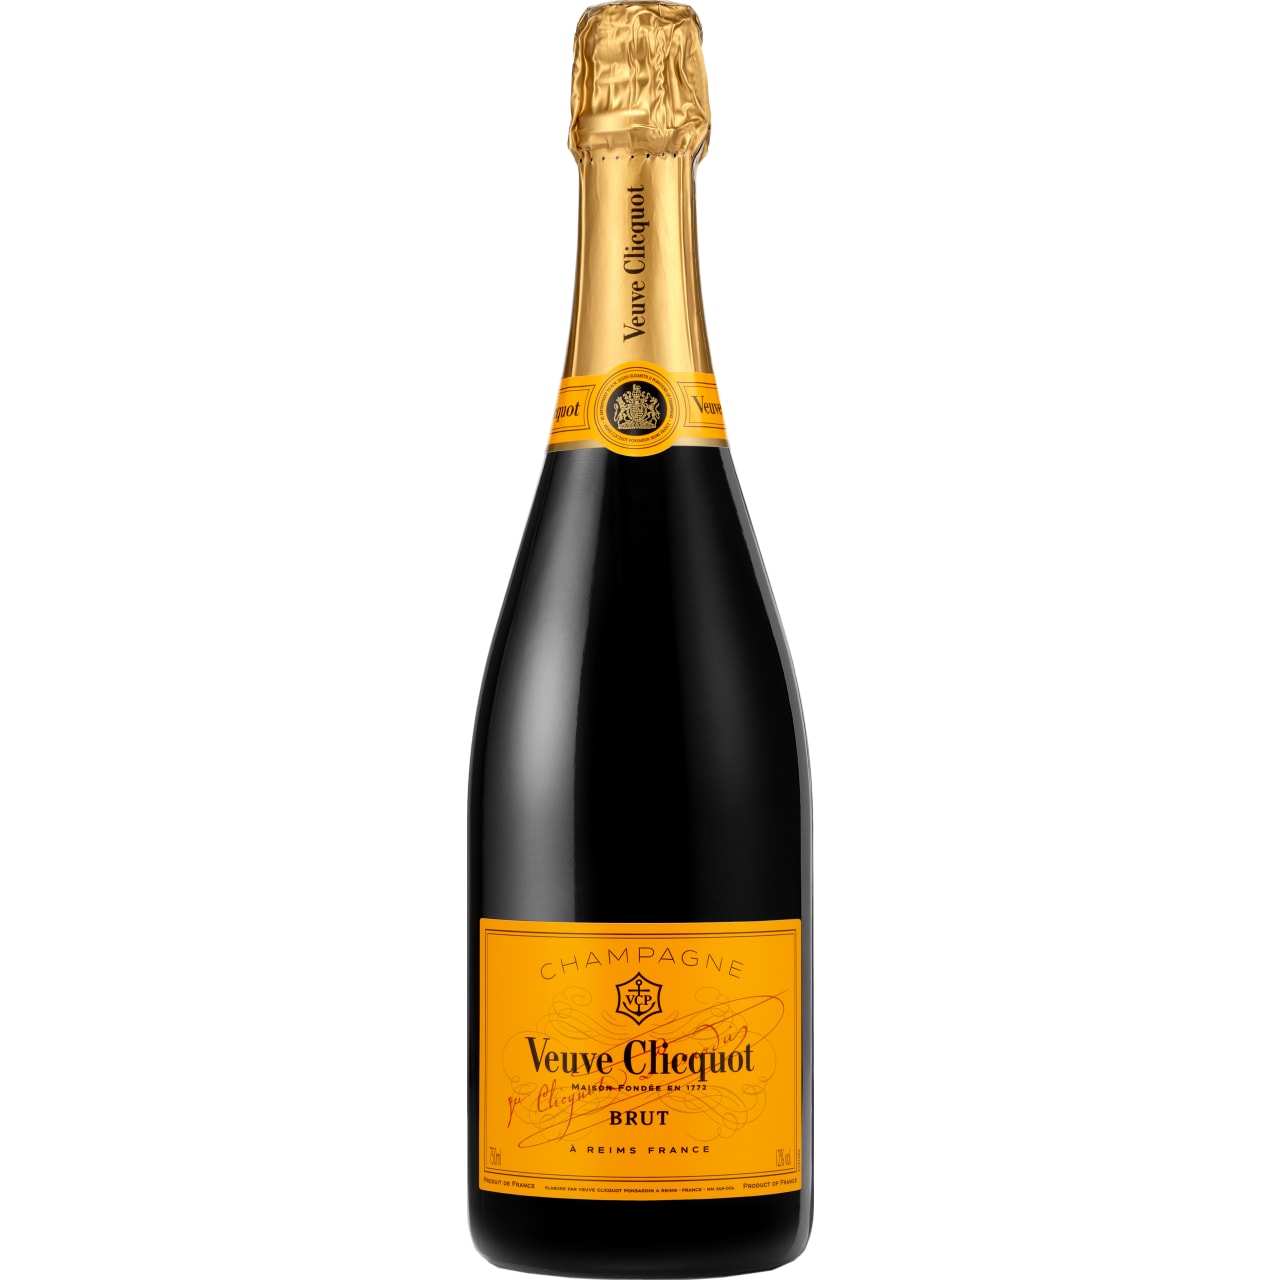 This champagne stands out for its beautiful harmony, its large structure, its freshness and its intense fruity aromas.